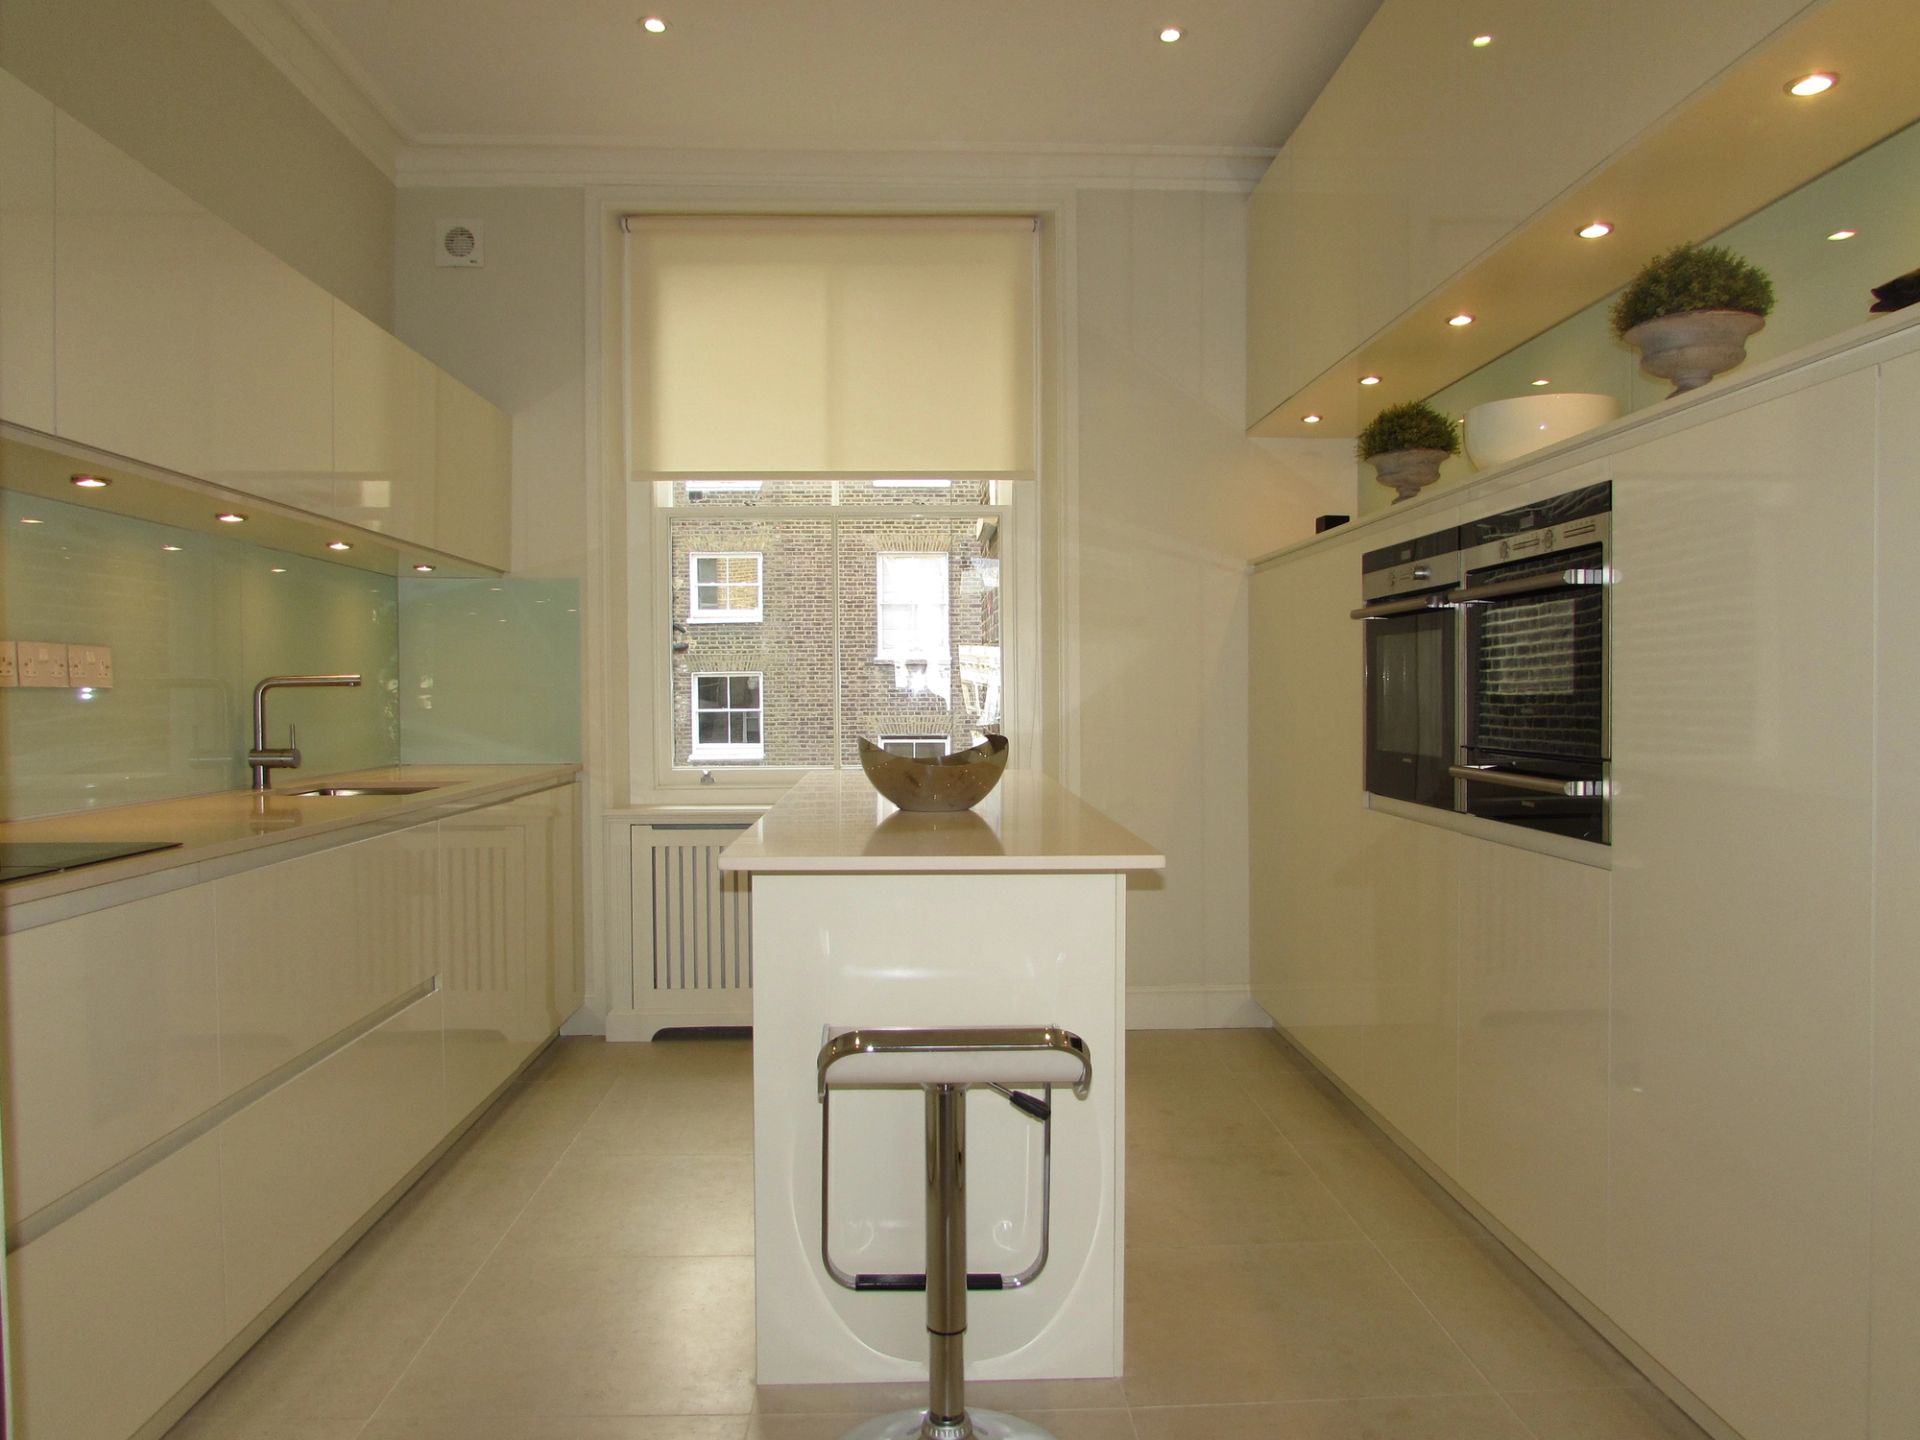 Kitchen with island in the middle and worktop to the left and cupboard to the right